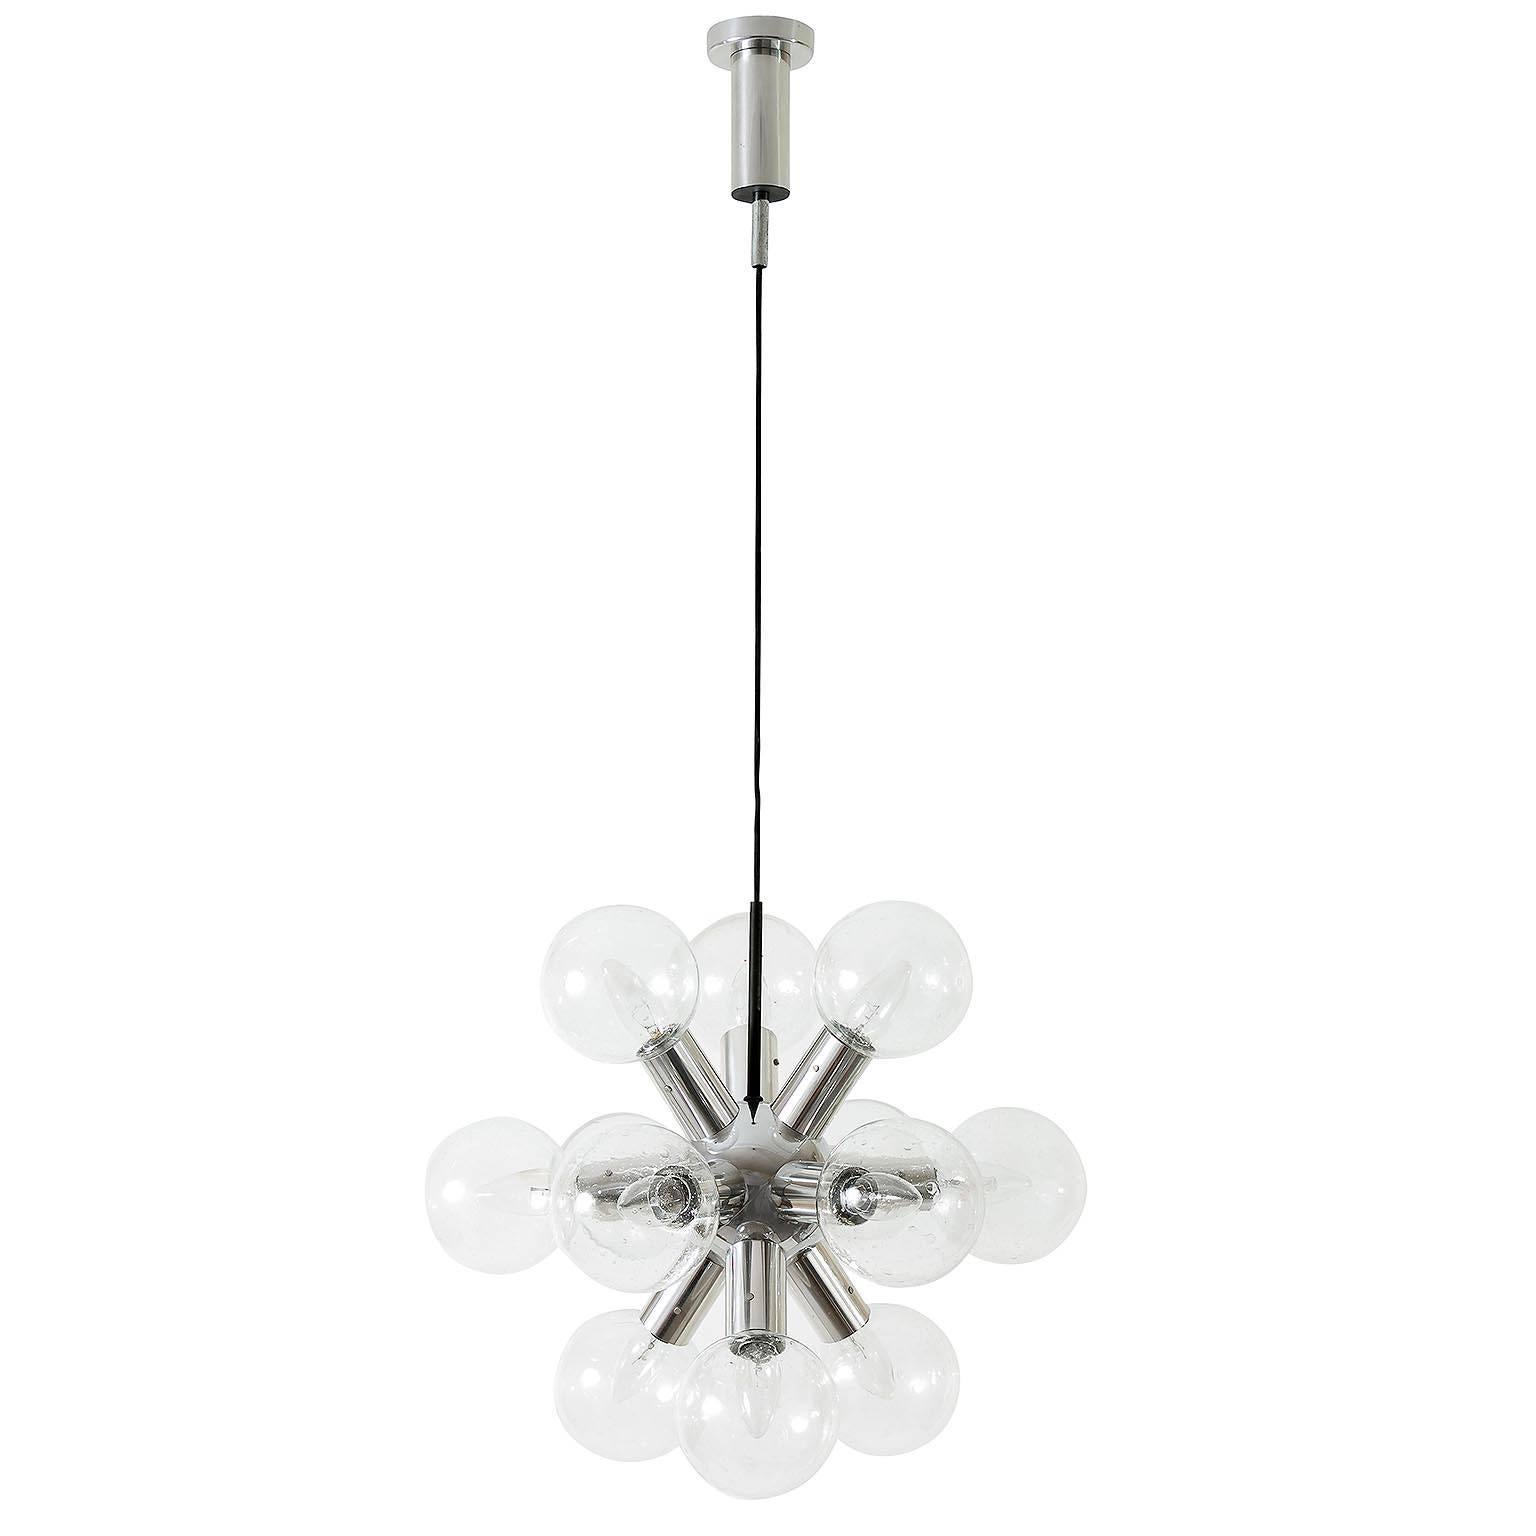 One of Two rare and fantastic 12-arm atomic chandeliers / pendant lights model 